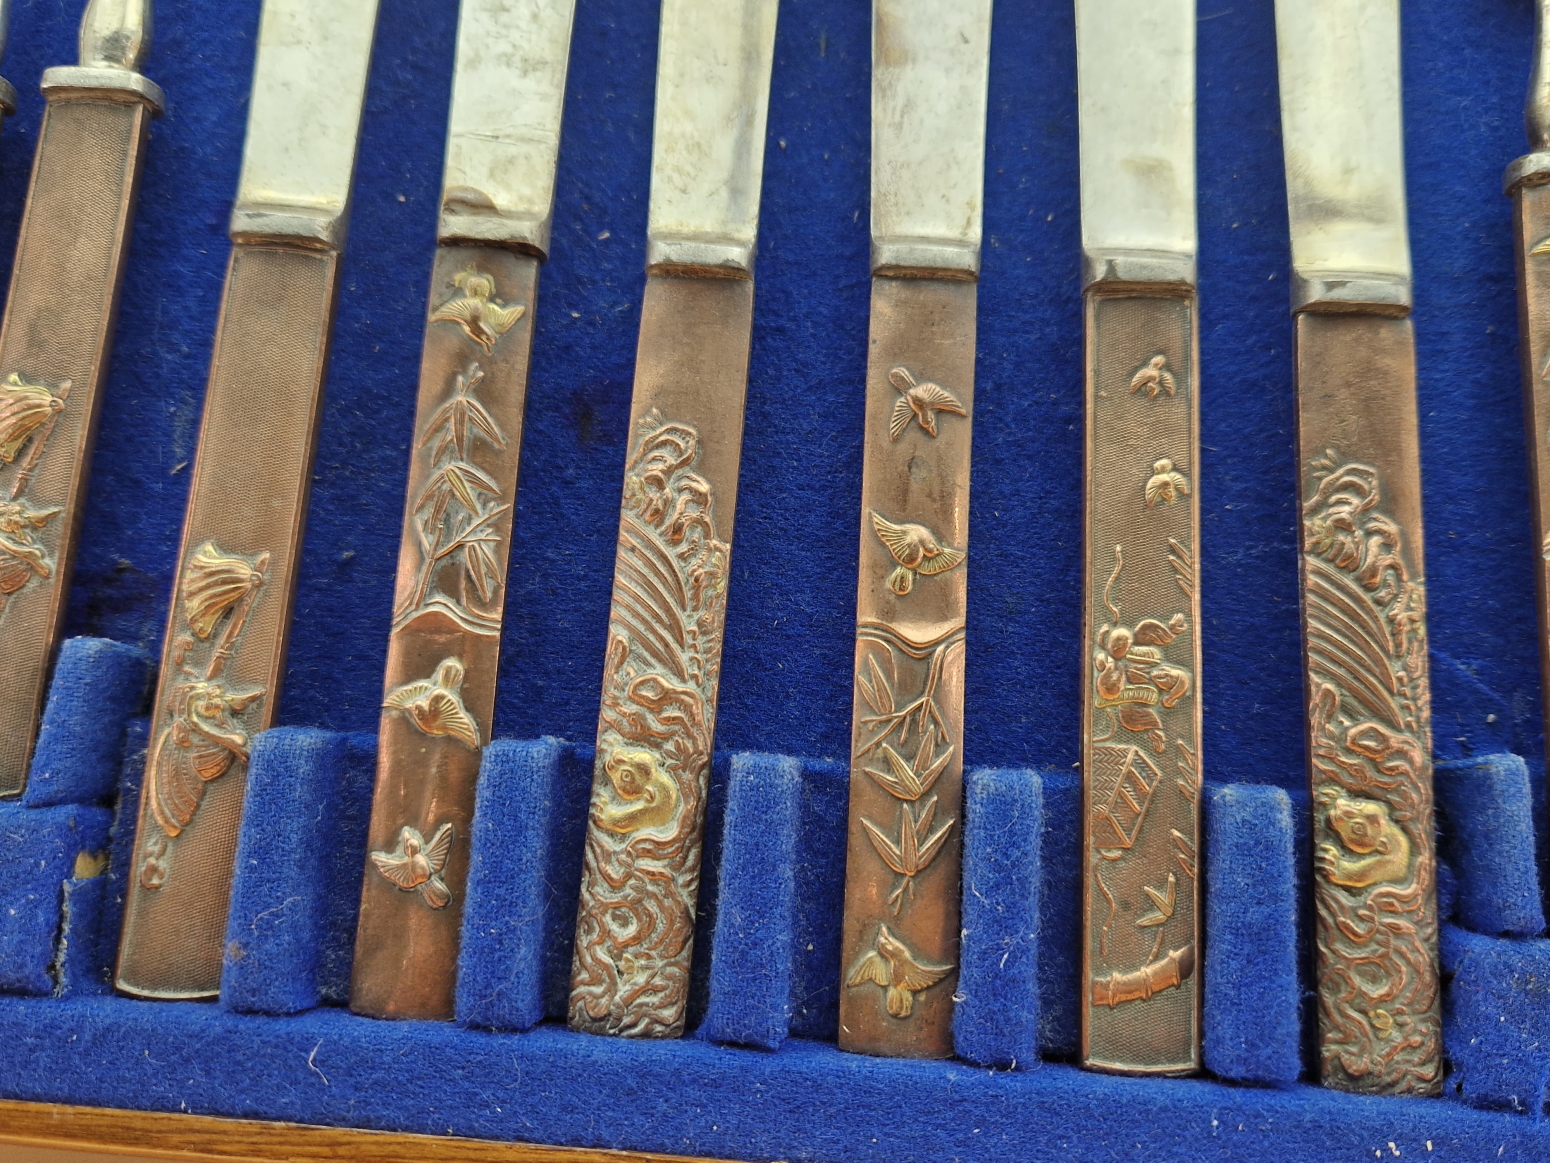 A TRAY OF SIX FRUIT KNIVES AND FORKS, EACH WITH PARCEL GILT COPPER JAPANESE KOZUKA HANDLES - Image 3 of 9